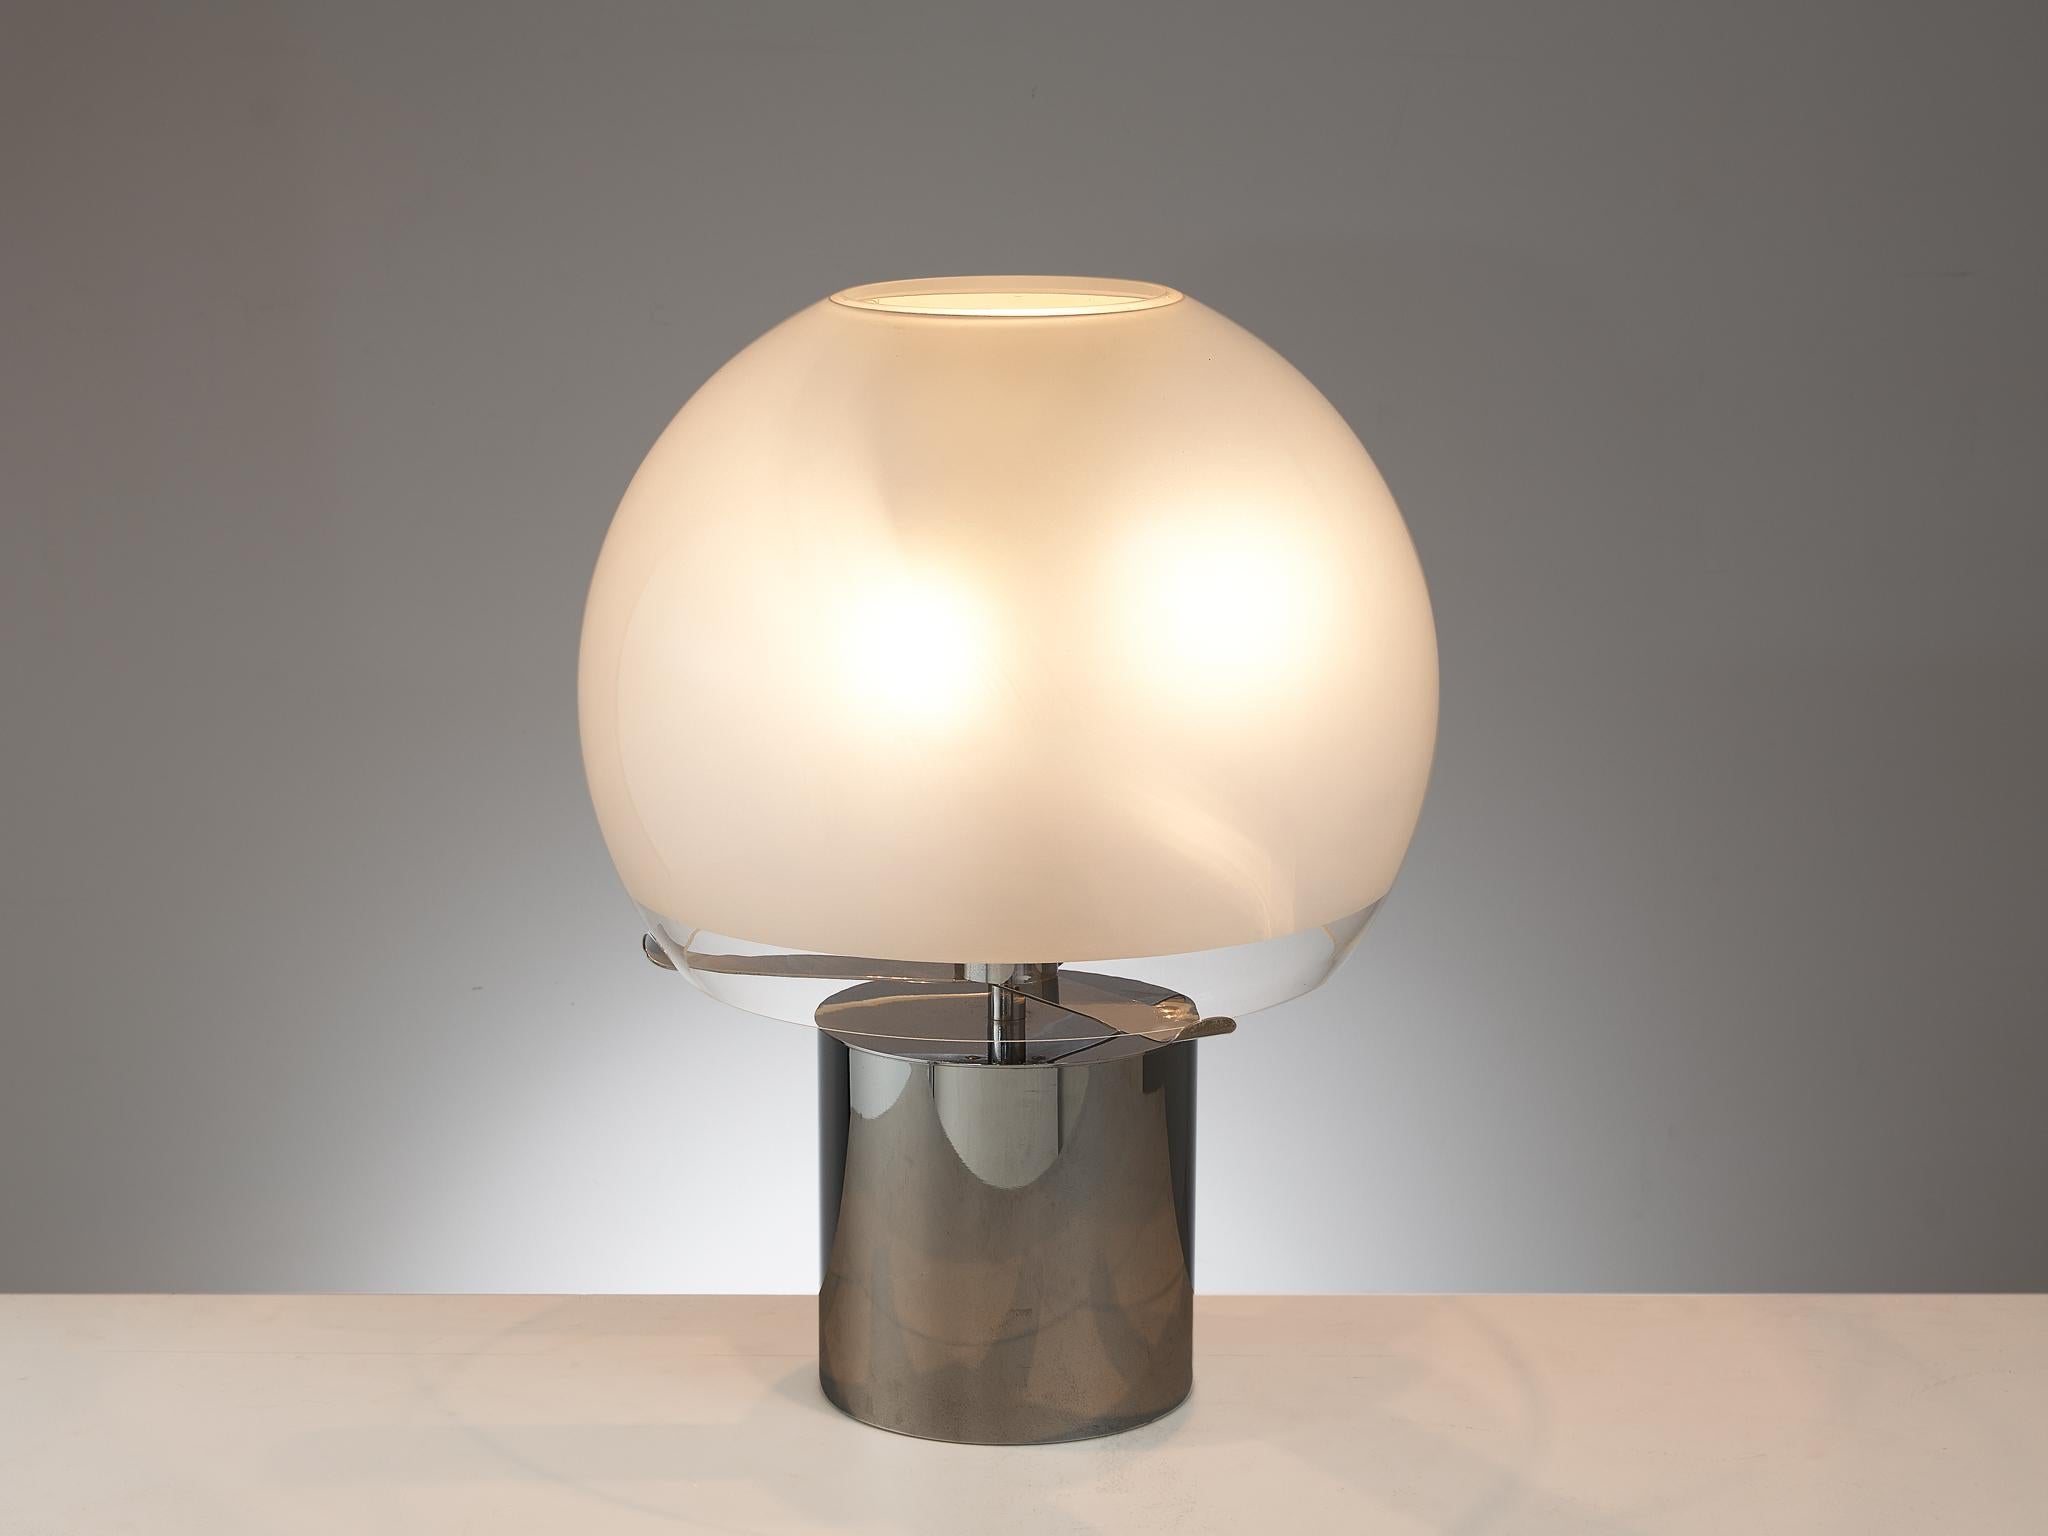 Luigi Caccia Dominioni for Azucena, table lamp, model Porcino, diameter 45 cm, steel, chrome, frosted glass, Italy, 1966. 

Futuristic spherical lamp designed by Italian designer Luigi Caccia Dominioni for Azucena. Its design is reminiscent to the